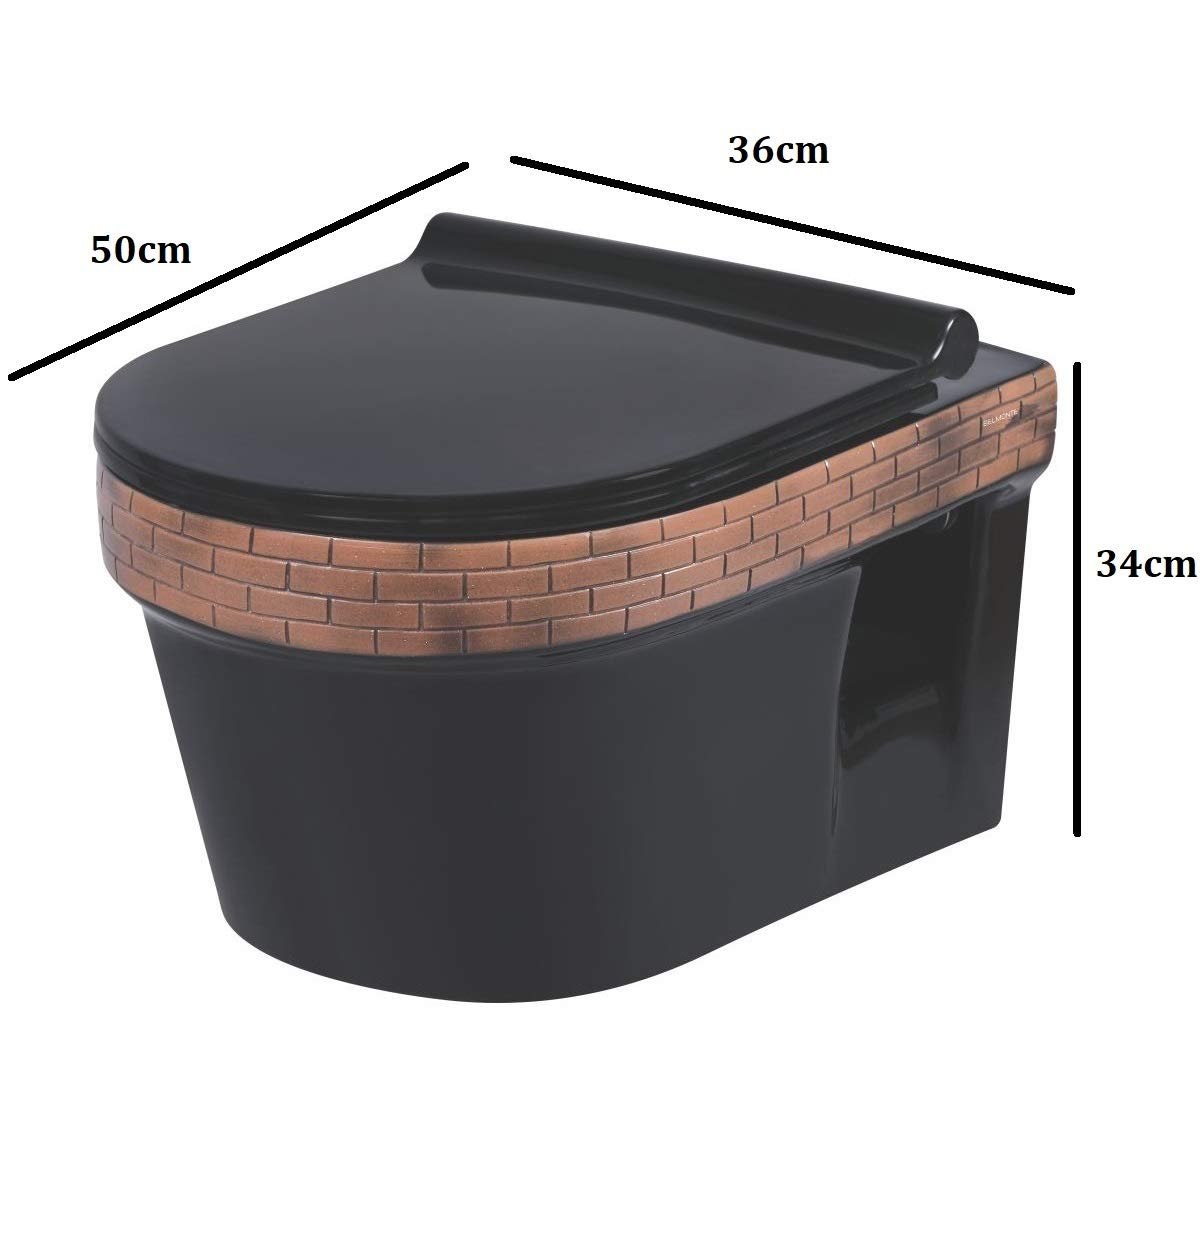 InArt Luxury Black Wall Mounted Toilet Rimless Flushing Ceramic - Seat Included - InArt-Studio-USA